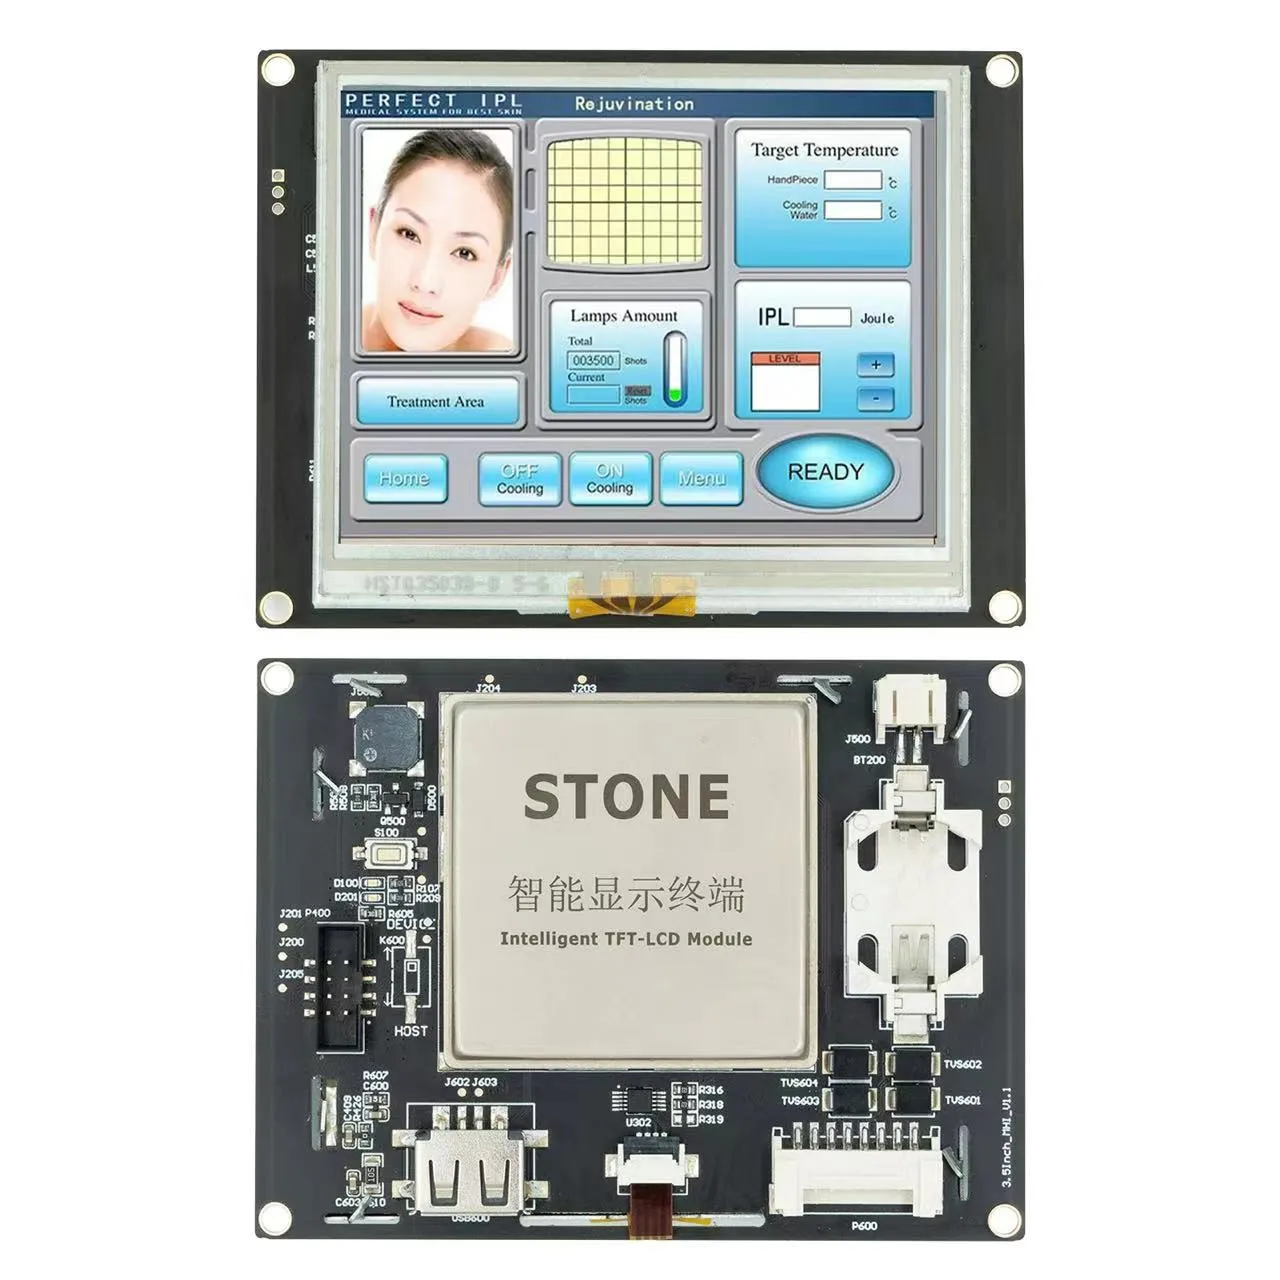 SCBRHMI LCD Touch Basic Display STWI035WT-01 - 3.5 TFT Intelligent Resistive Touch Screen Module Display scbrhmi lcd touch display 10 1 1024x600 tft intelligent resistive touch screen module